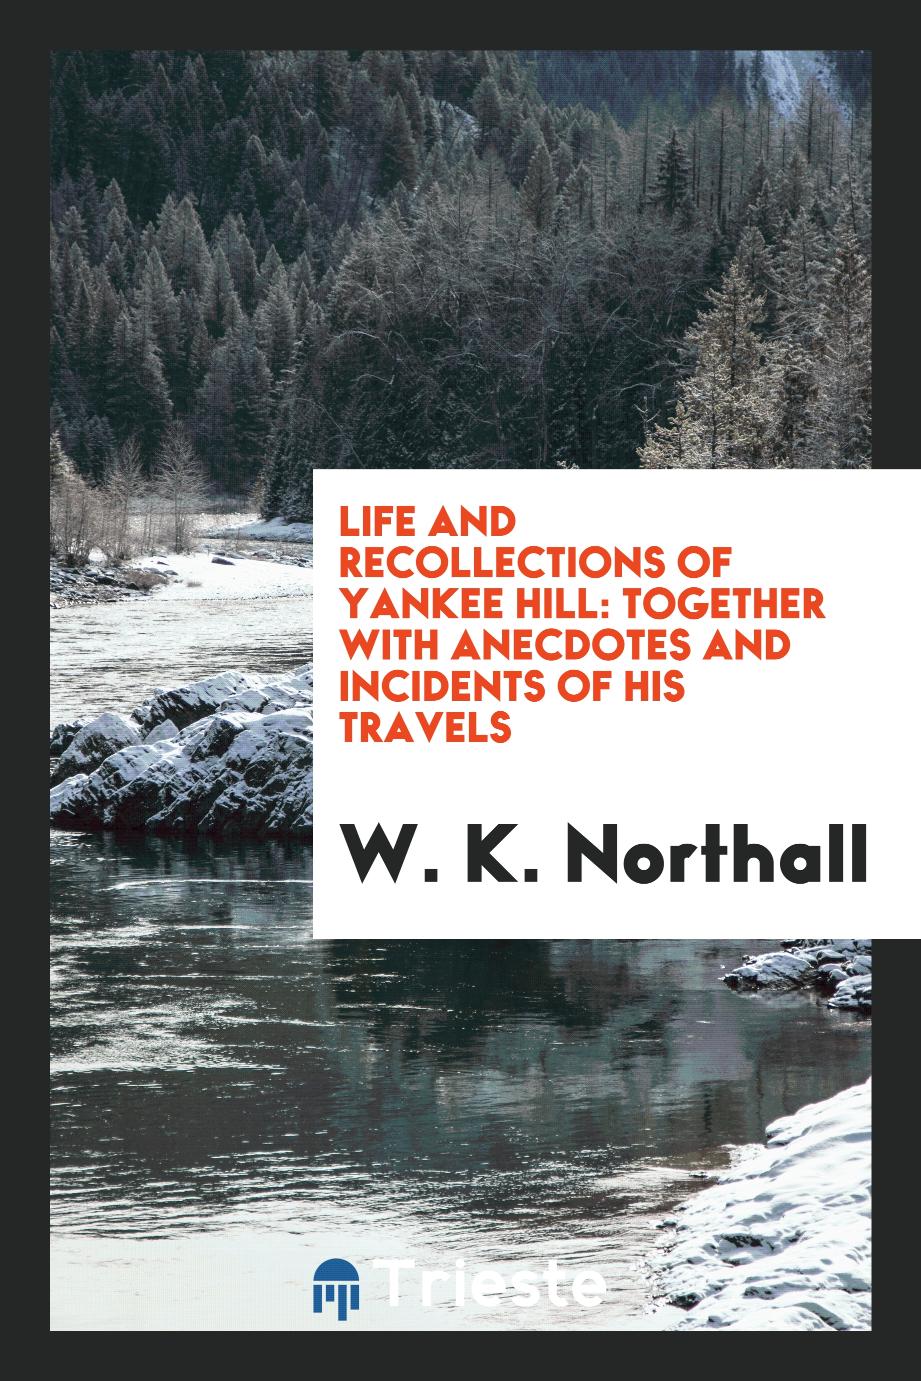 Life and recollections of Yankee Hill: together with anecdotes and incidents of his travels